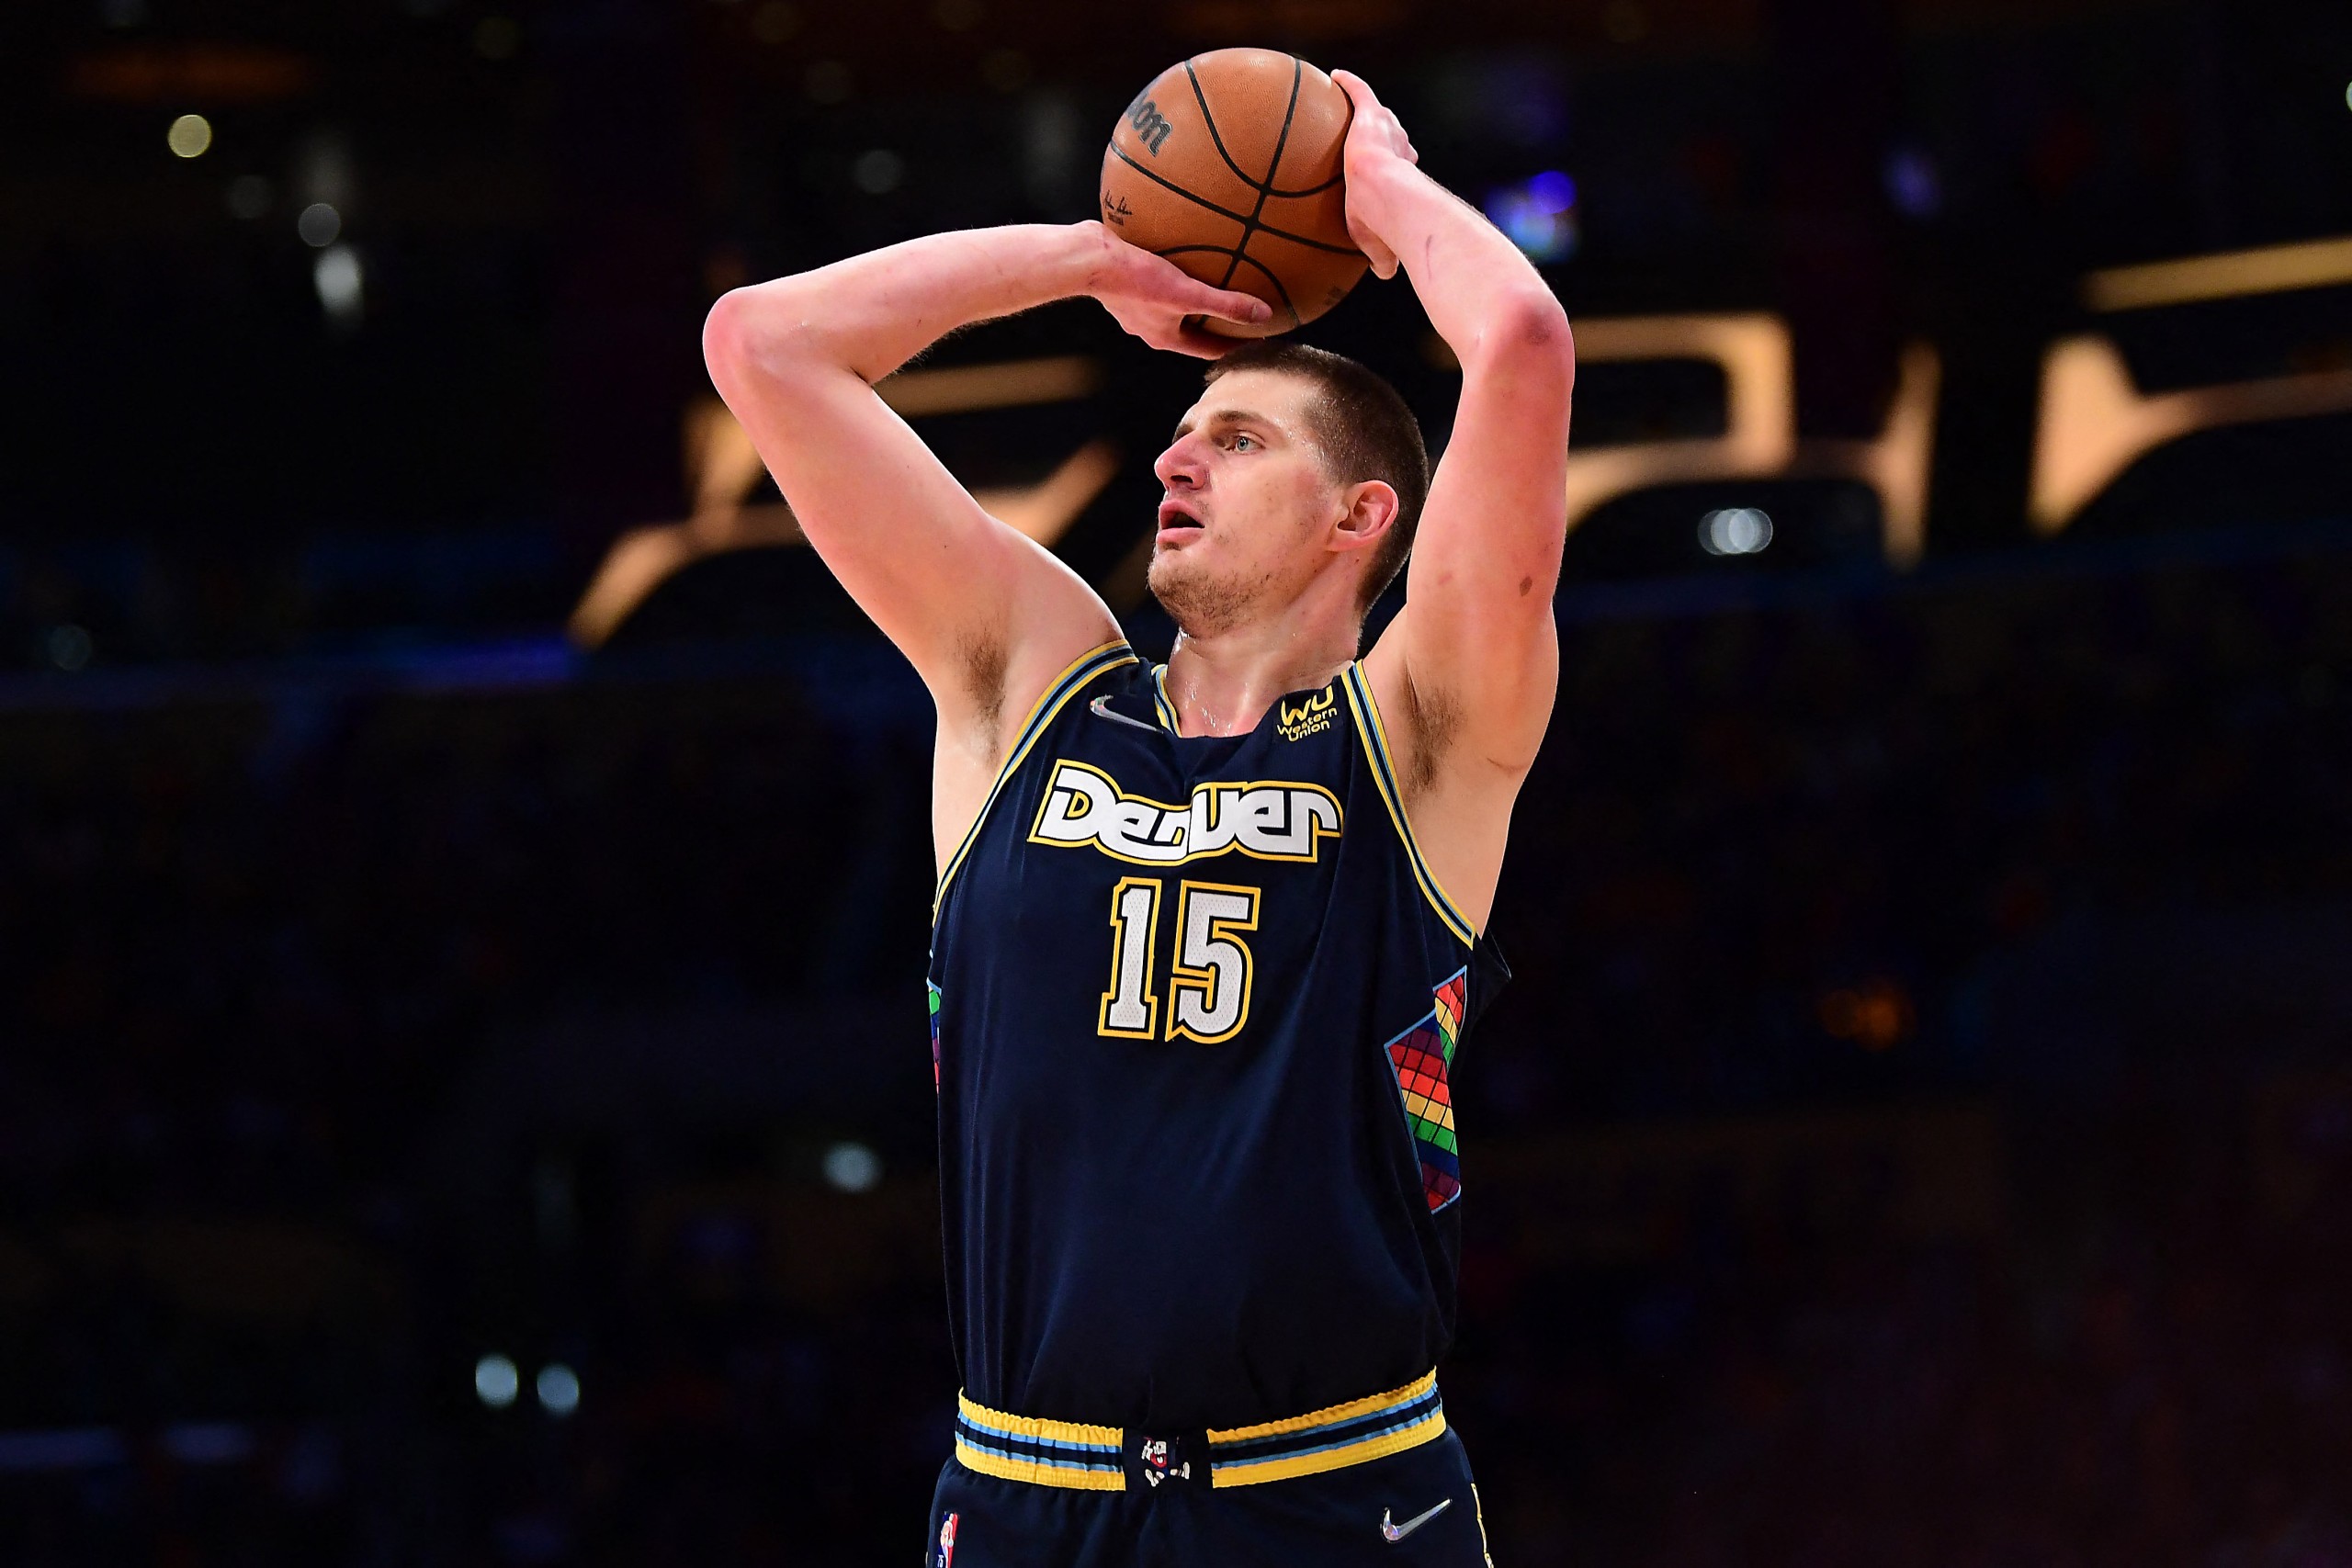 Apr 3, 2022; Los Angeles, California, USA; Denver Nuggets center Nikola Jokic (15) shoots against the Los Angeles Lakers during the first half at Crypto.com Arena. Mandatory Credit: Gary A. Vasquez-USA TODAY Sports